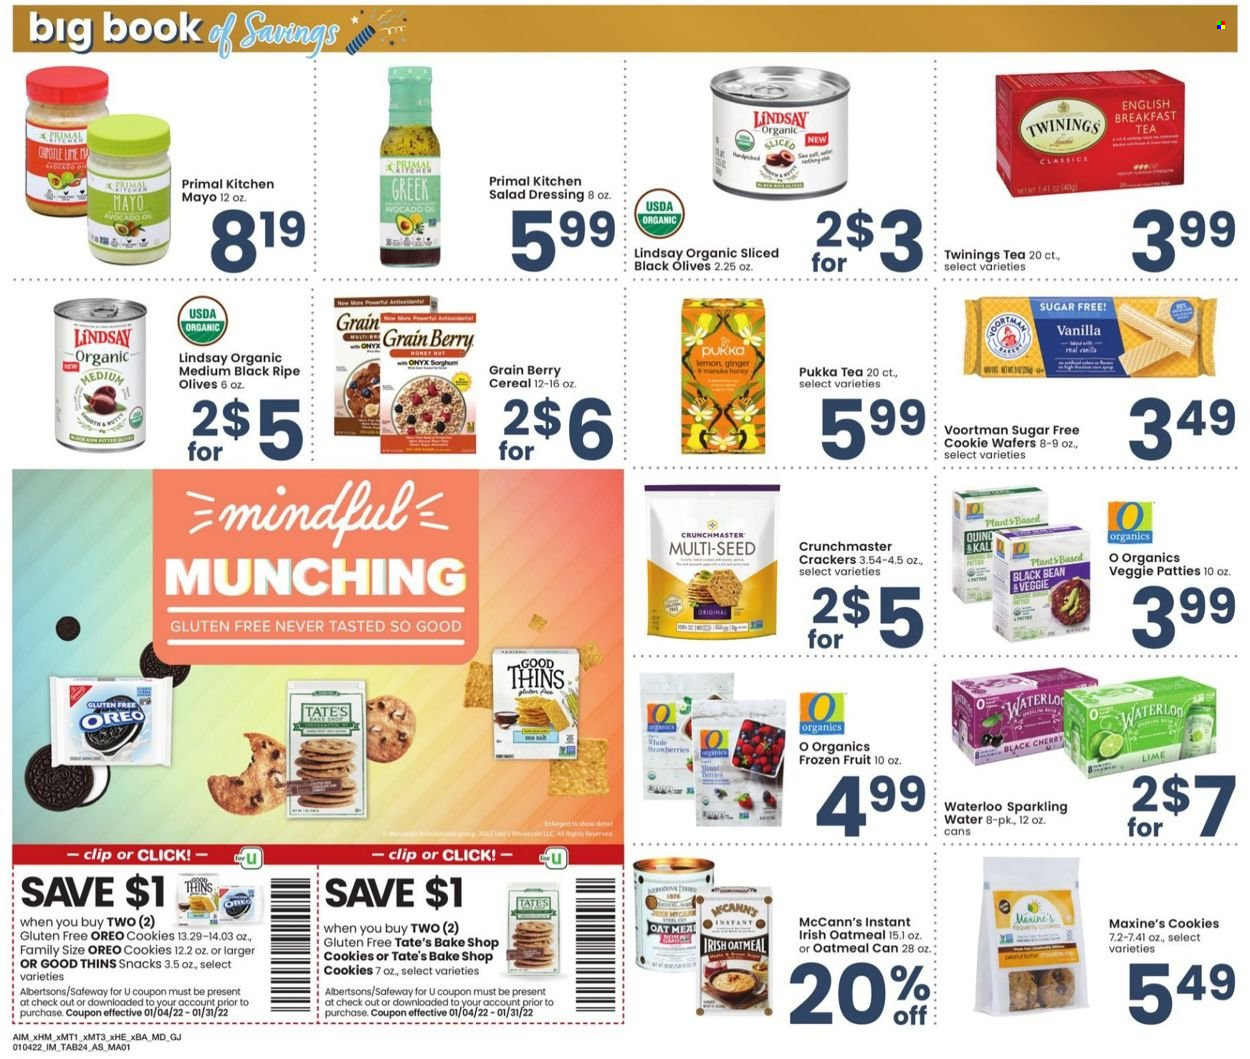 thumbnail - Albertsons Flyer - 01/04/2022 - 01/31/2022 - Sales products - ginger, cherries, Oreo, mayonnaise, cookies, wafers, snack, crackers, Thins, oatmeal, oats, olives, cereals, salad dressing, dressing, sparkling water, tea, Twinings, plant seeds, Primal. Page 24.